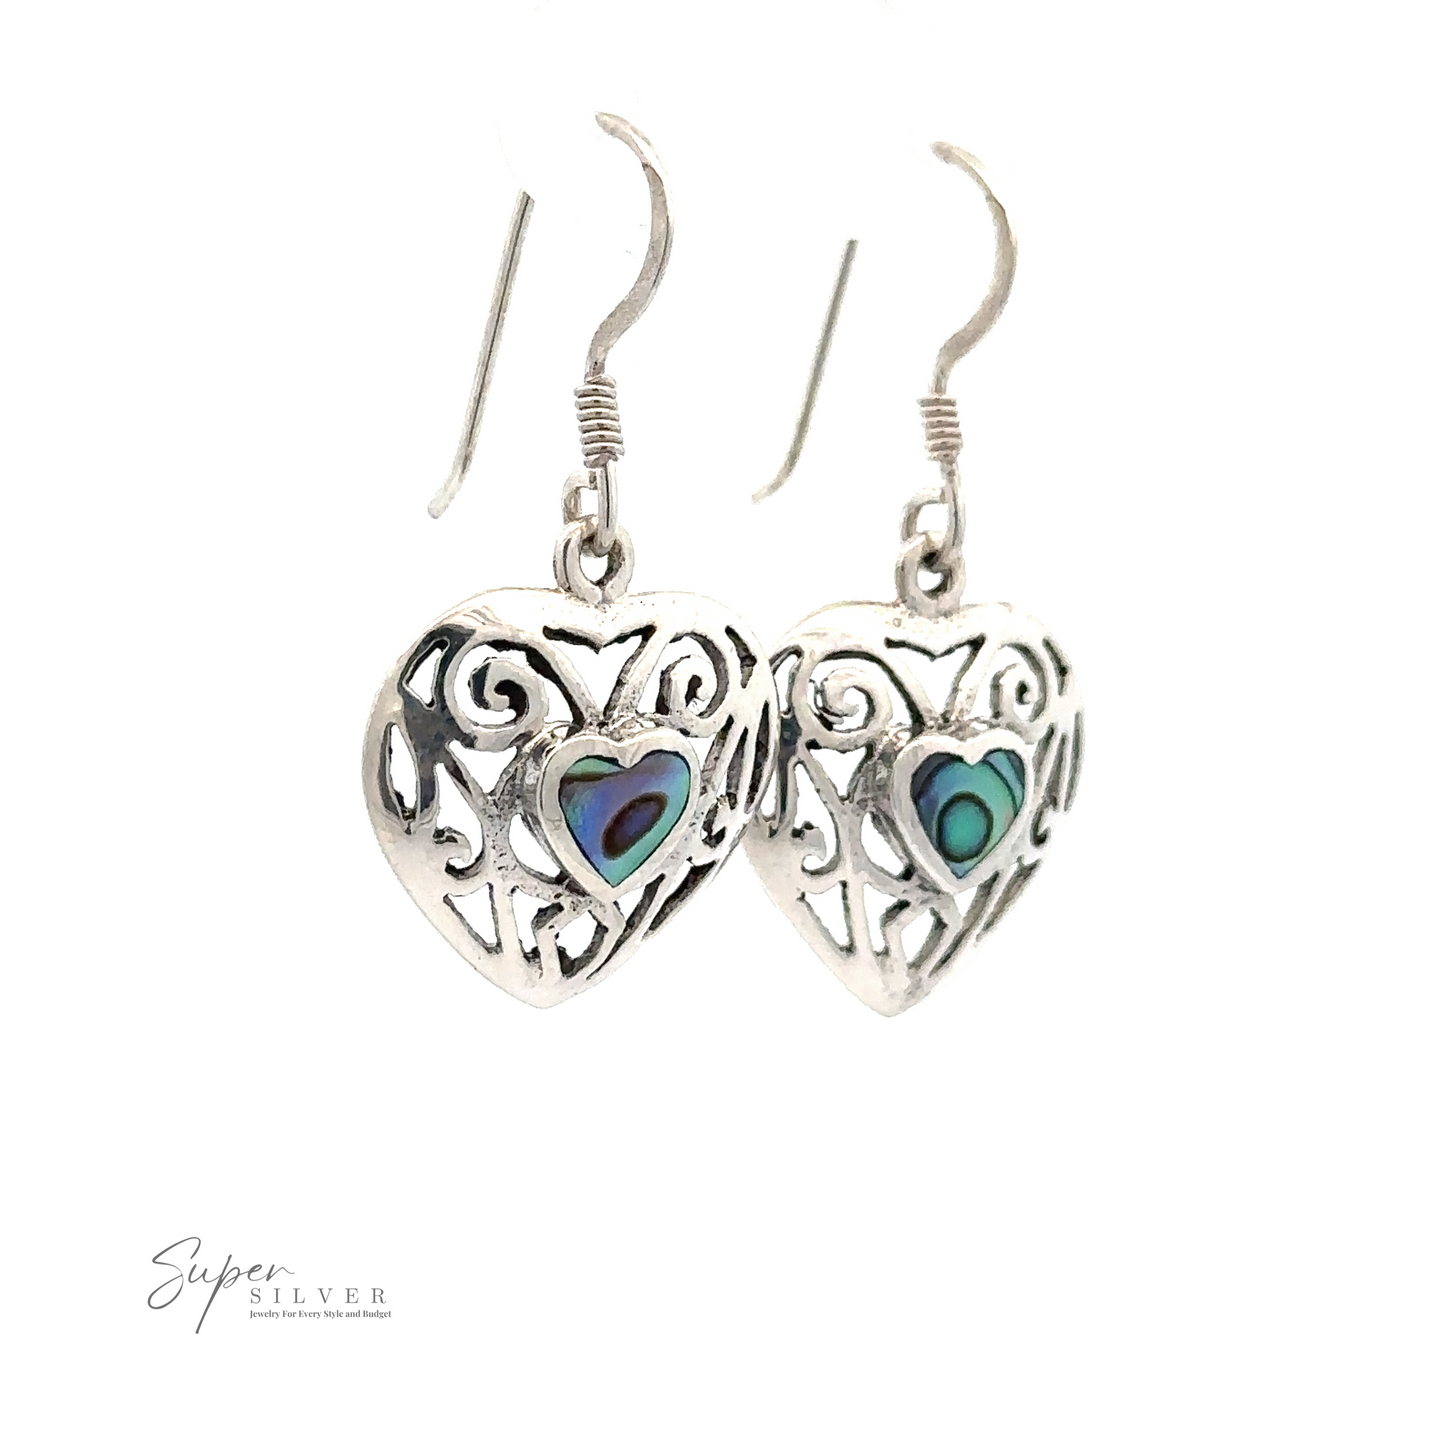 
                  
                    A pair of Elegant Heart Shaped Abalone Earrings with intricate cut-out designs and colorful inlays hang from hooks against a white background. "Super Silver" branding is visible in the bottom left corner.
                  
                